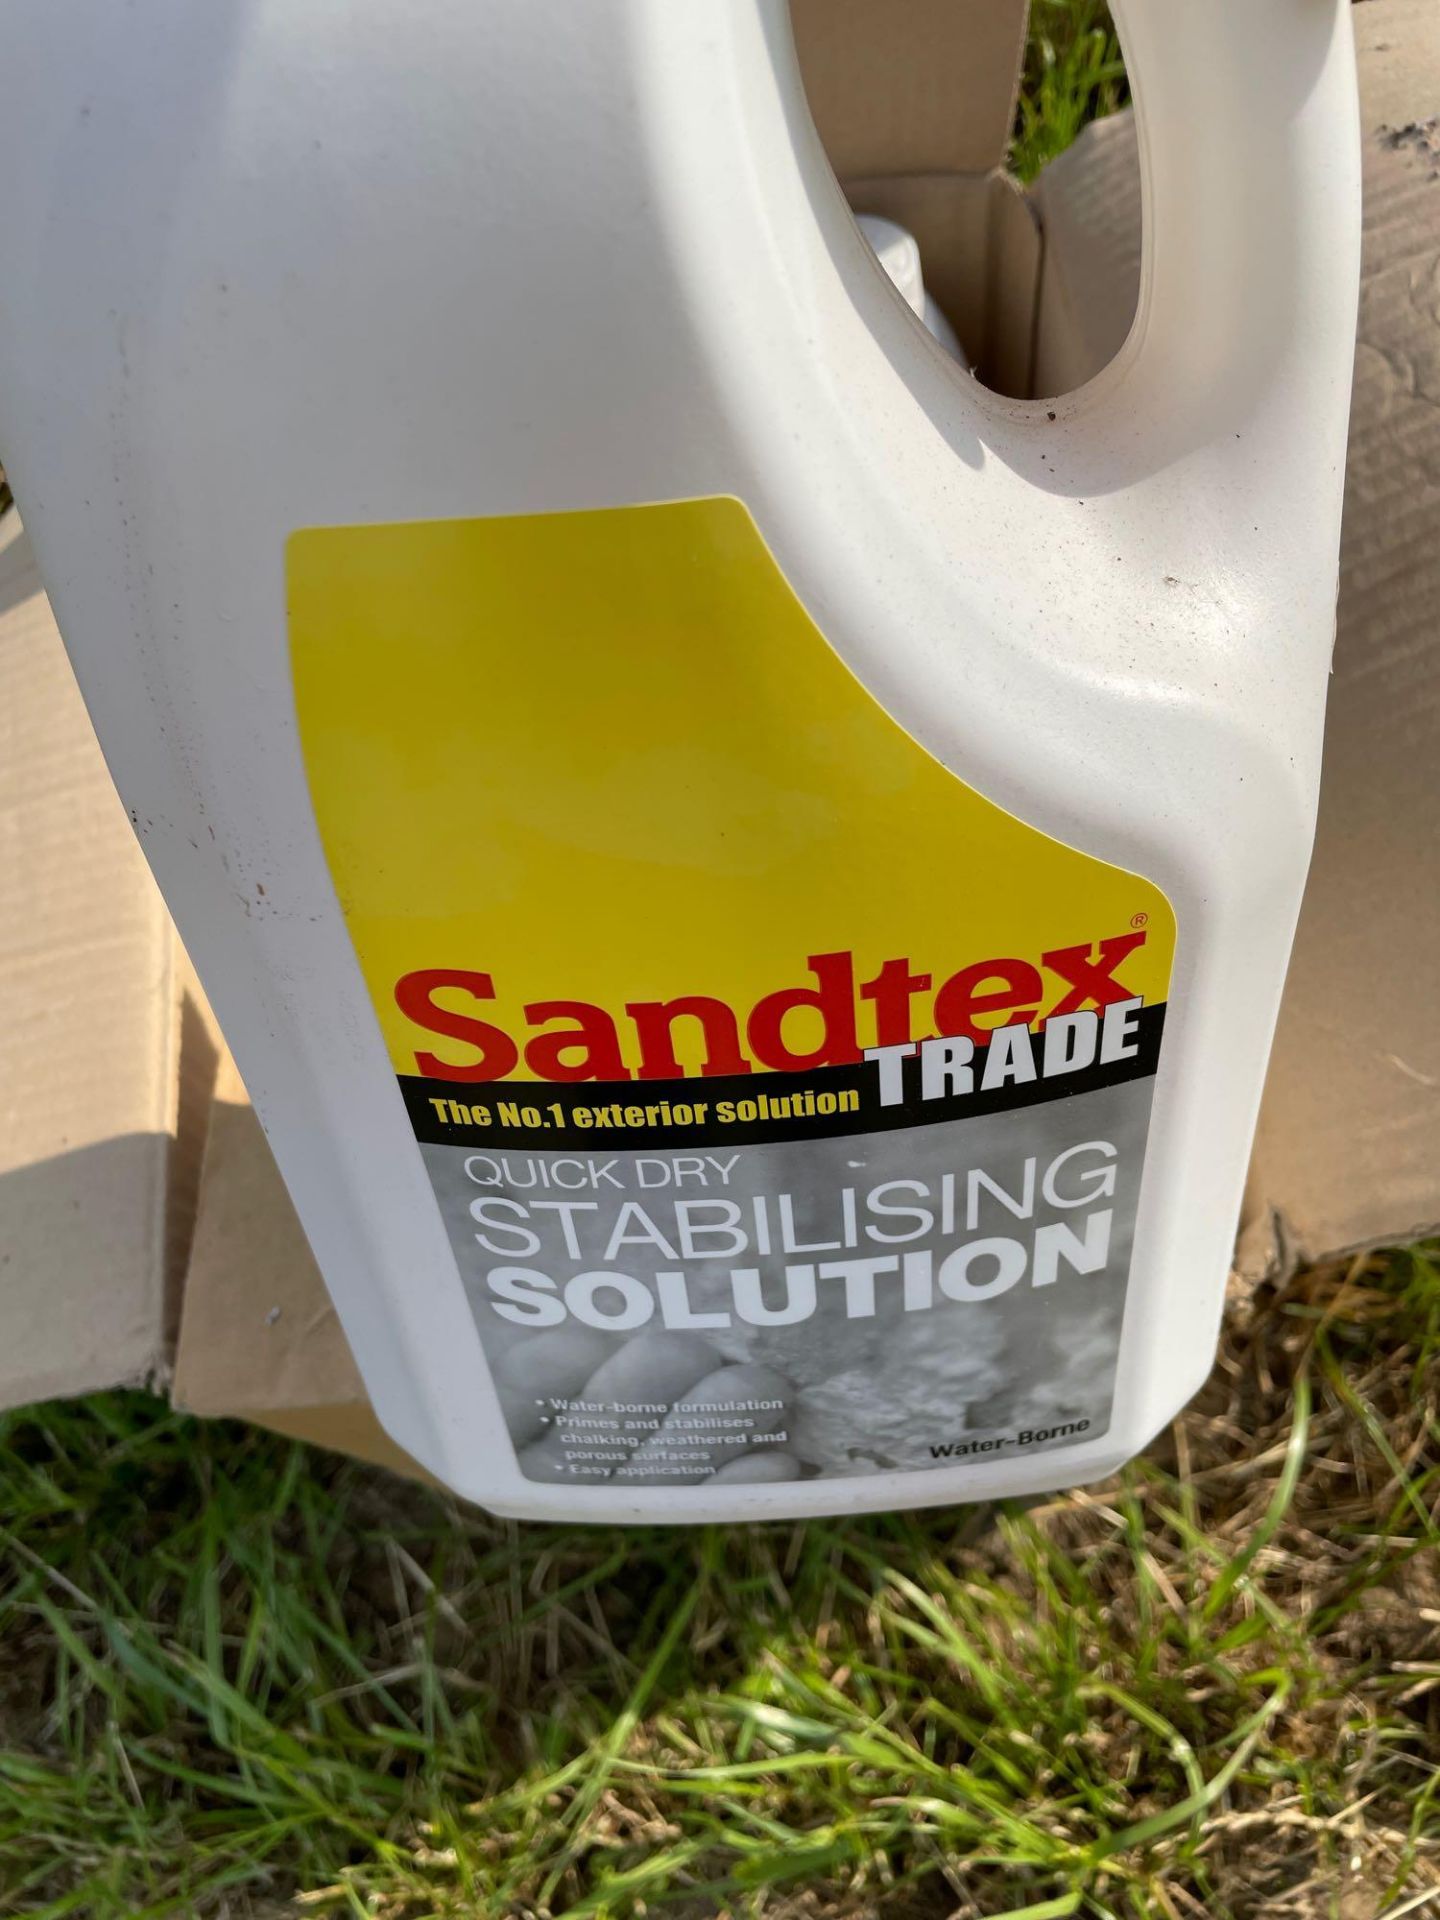 Qty Sandtex quick dry stabilising solution - Image 2 of 2